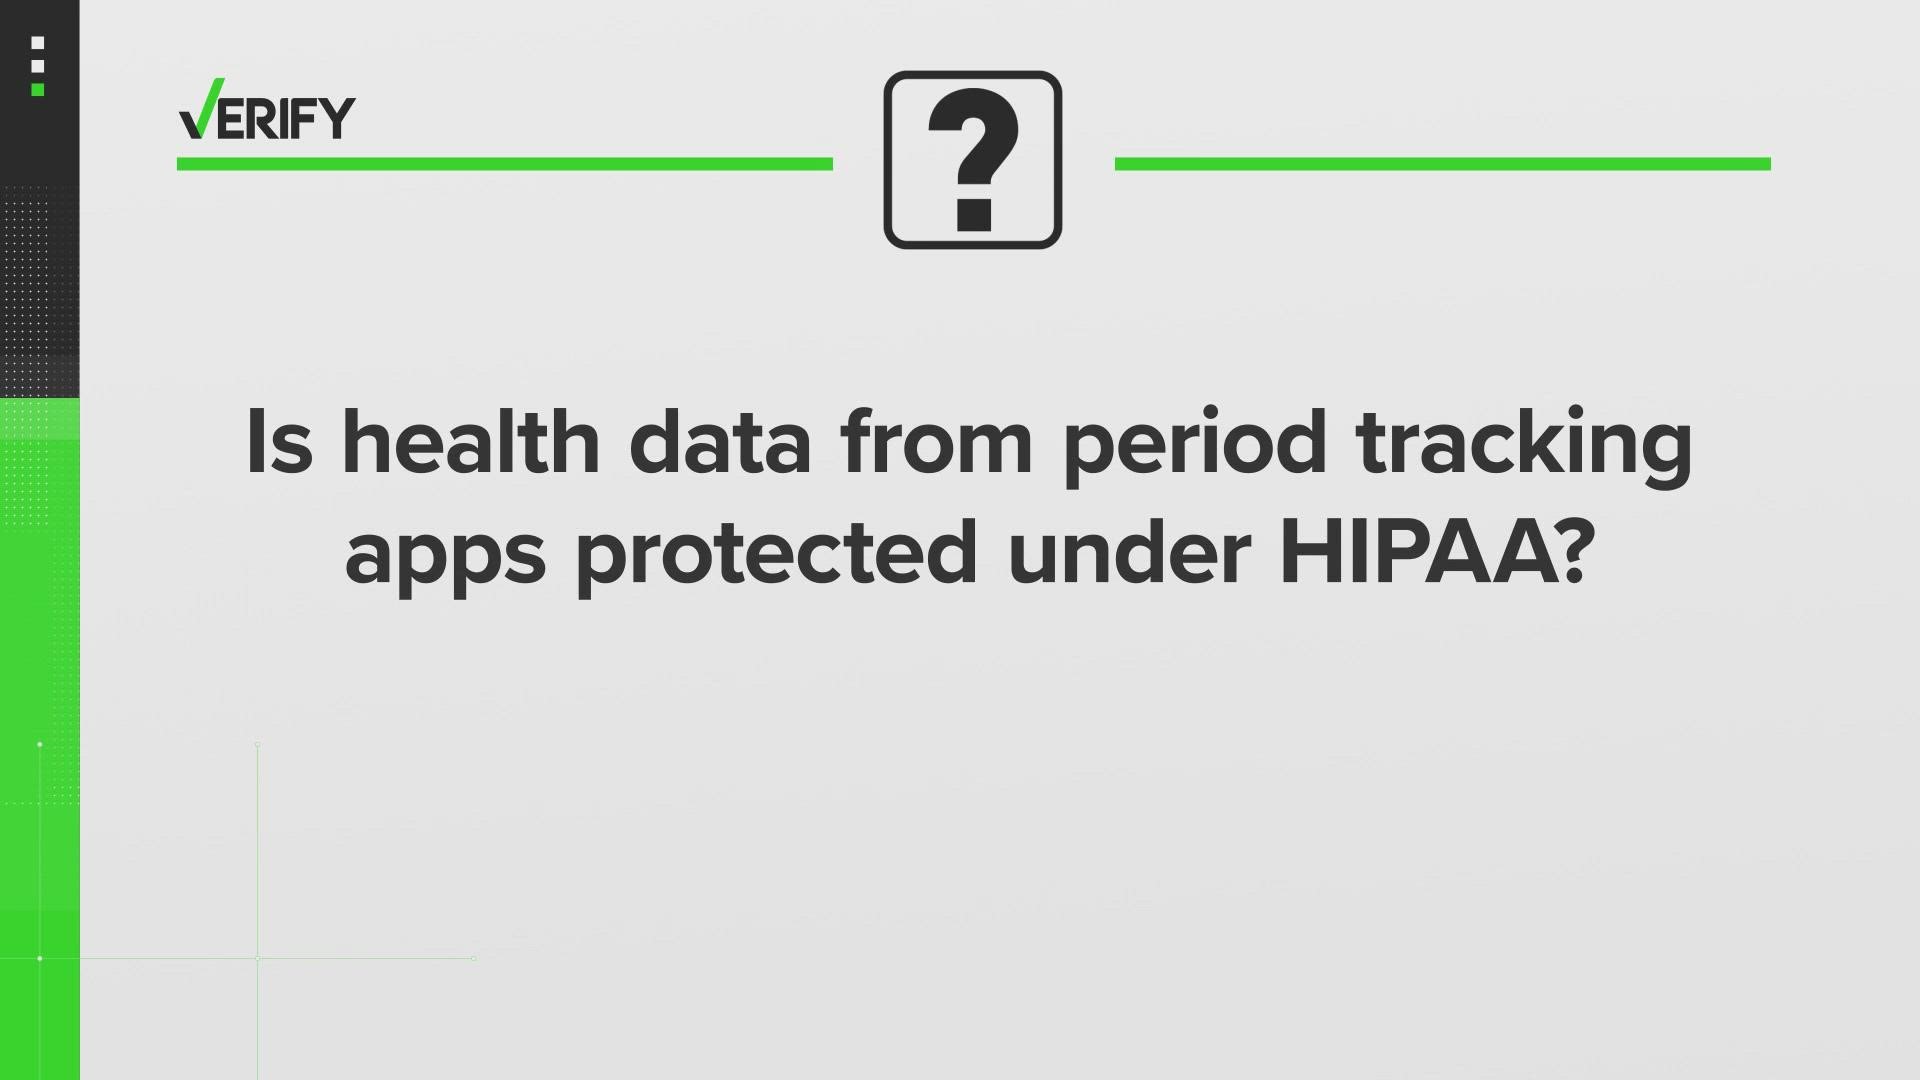 HIPAA applies to covered entities, like health care providers that conduct electronic transactions, but not most of the period-tracking apps found in an app store.